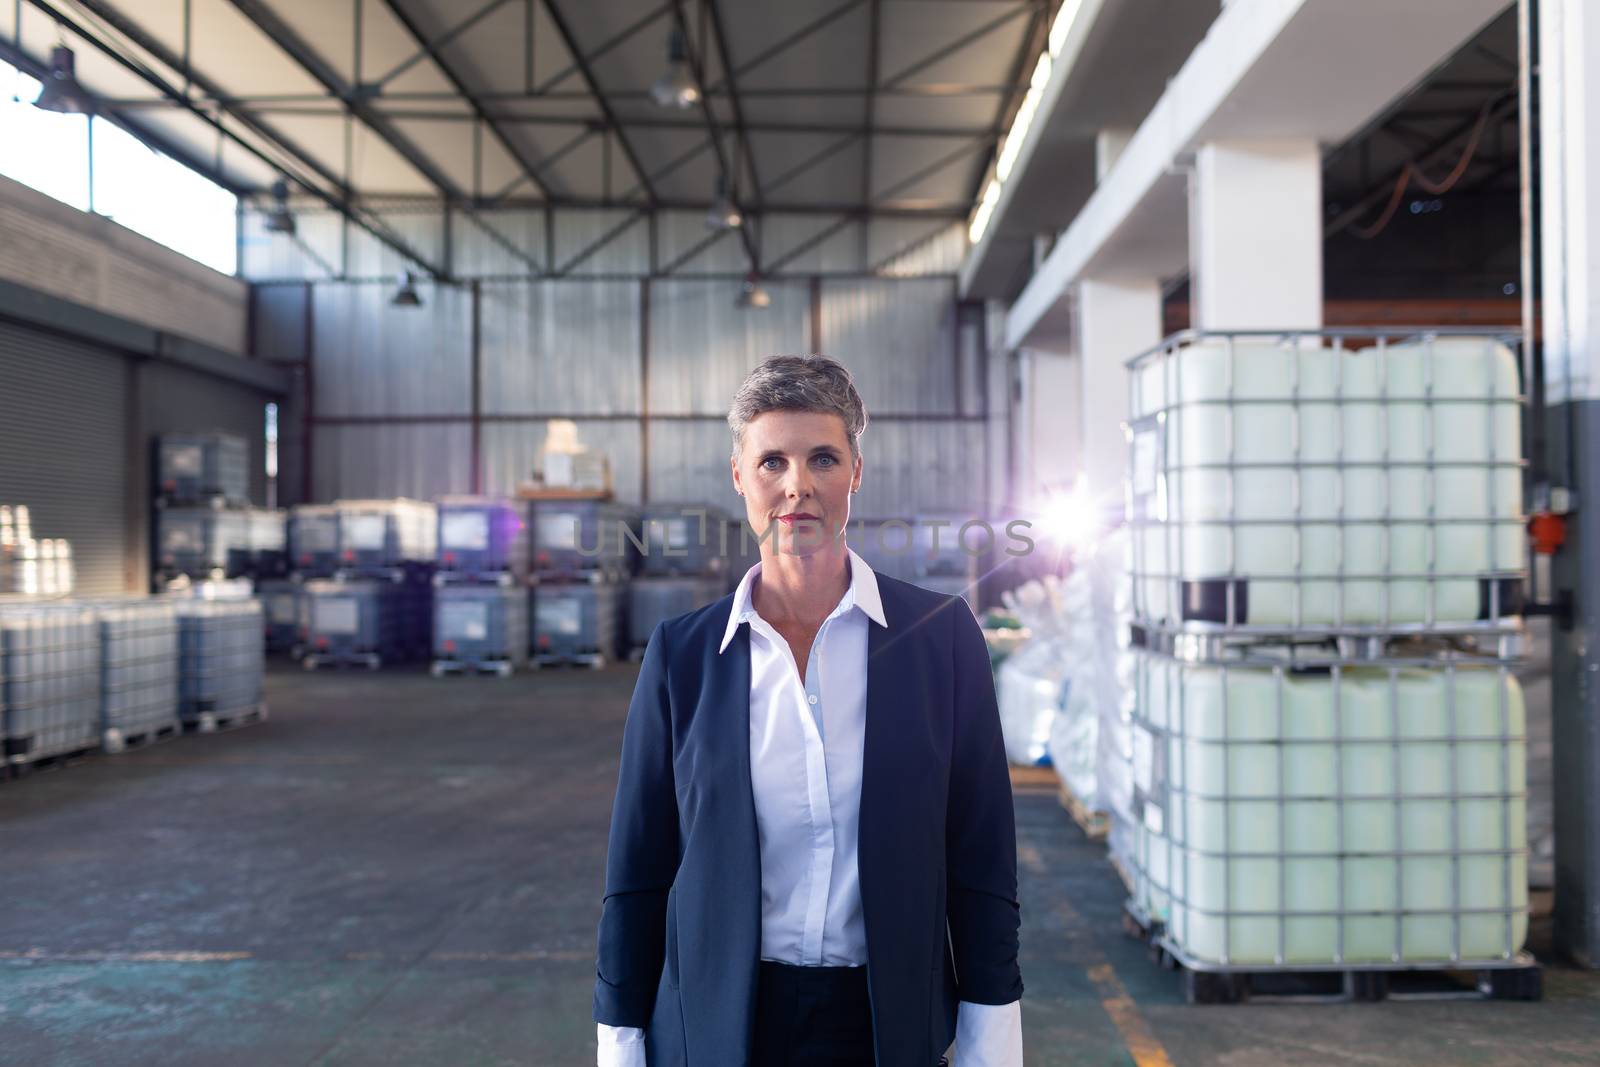 Portrait of Caucasian mature female manager standing in warehouse. This is a freight transportation and distribution warehouse. Industrial and industrial workers concept